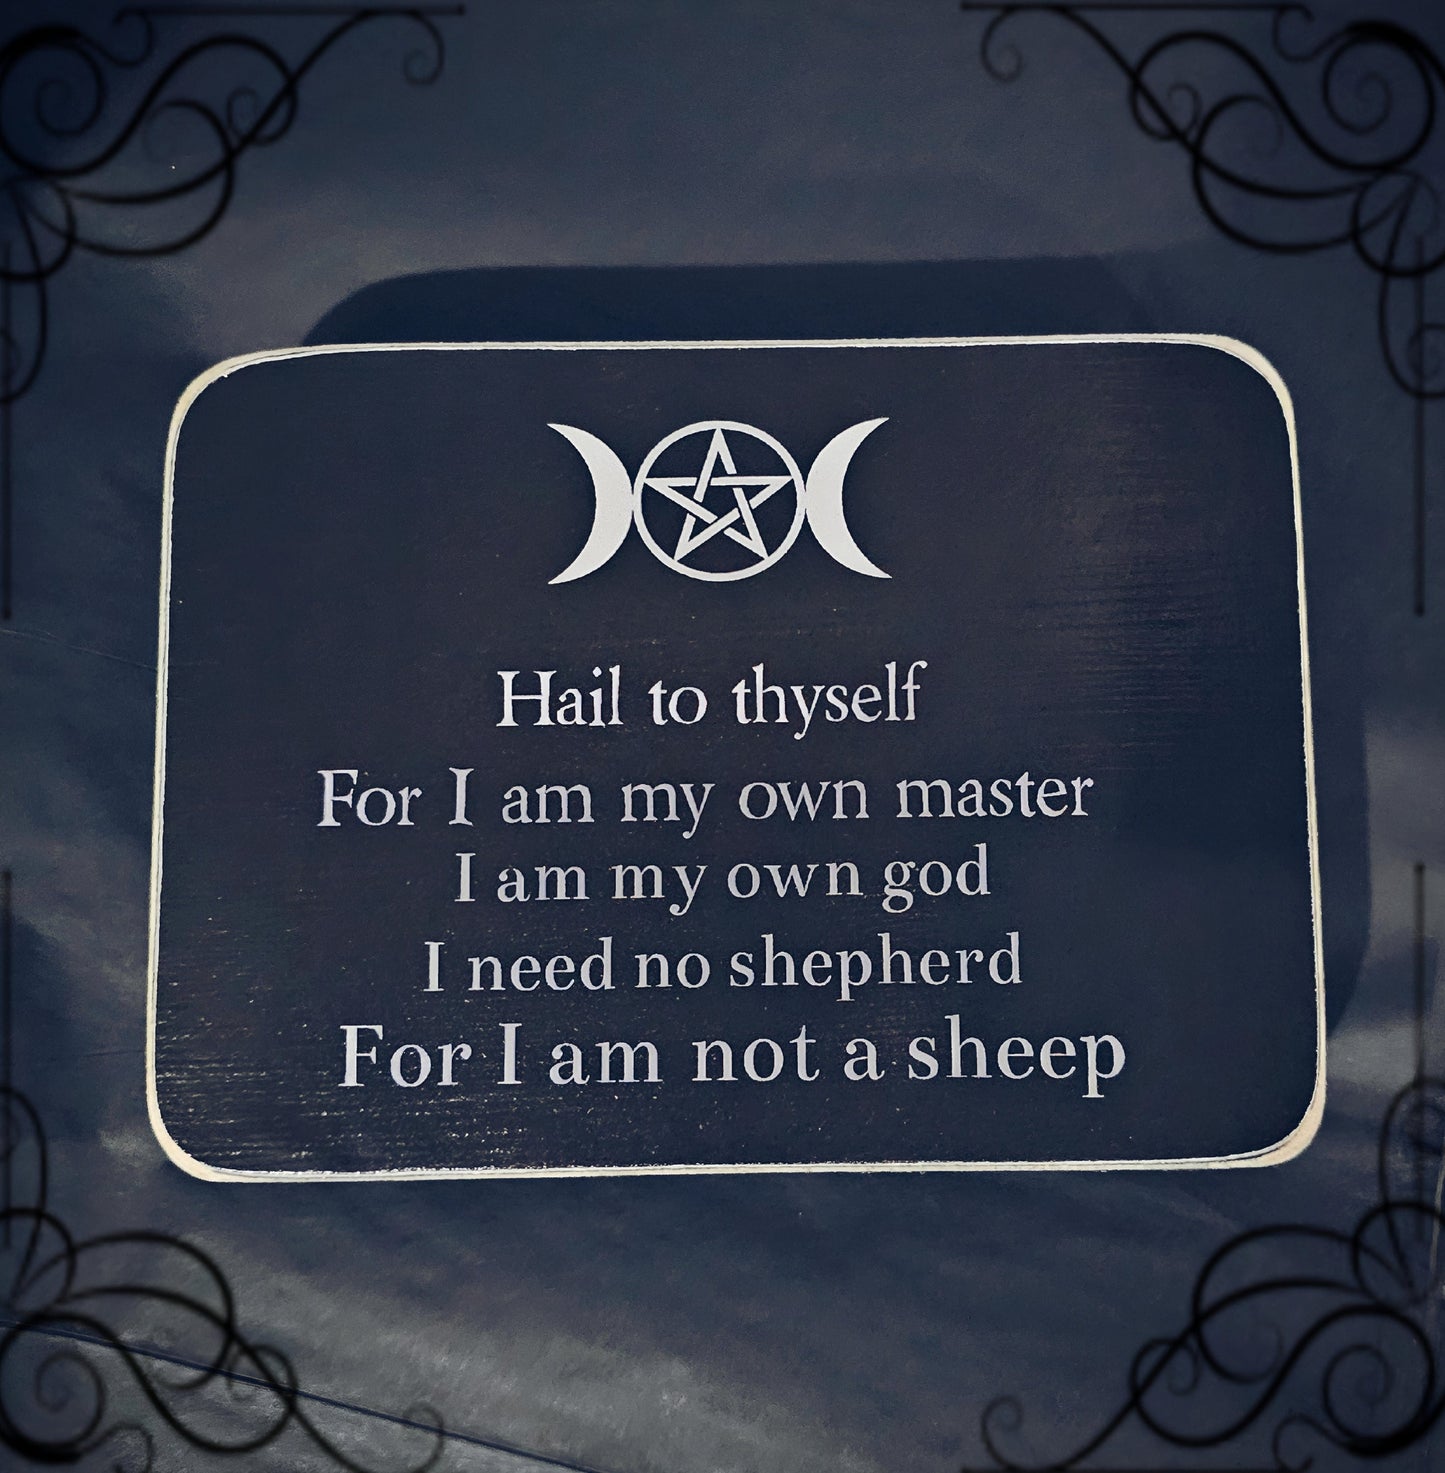 Hail to thyself box sign (more options)